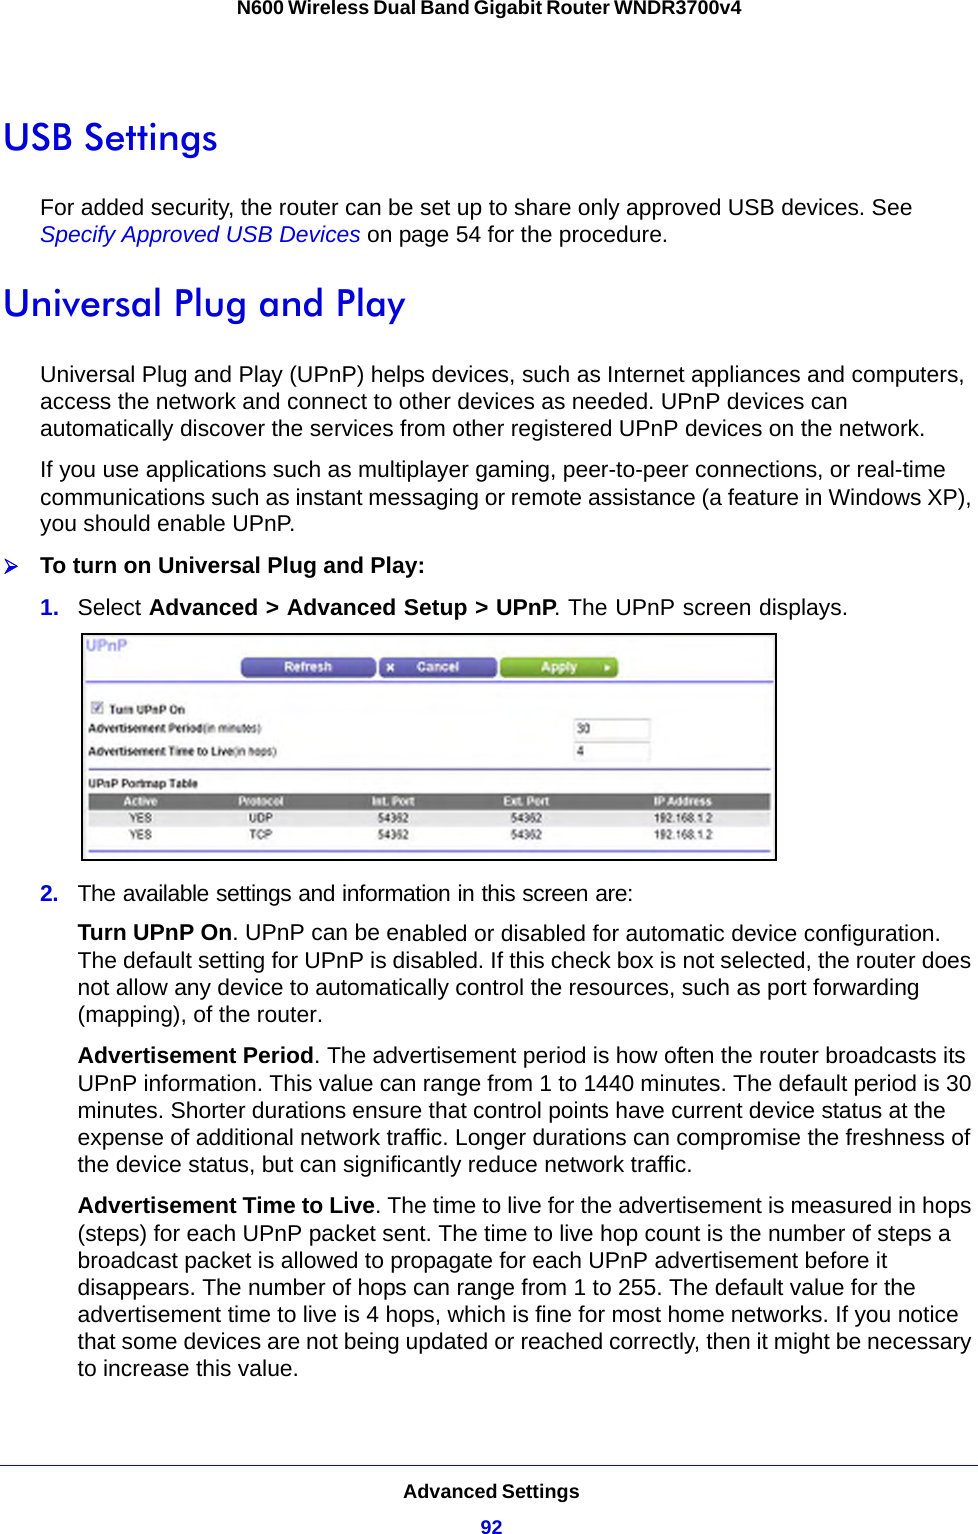 Advanced Settings92N600 Wireless Dual Band Gigabit Router WNDR3700v4 USB SettingsFor added security, the router can be set up to share only approved USB devices. See Specify Approved USB Devices on page 54 for the procedure.Universal Plug and PlayUniversal Plug and Play (UPnP) helps devices, such as Internet appliances and computers, access the network and connect to other devices as needed. UPnP devices can automatically discover the services from other registered UPnP devices on the network.If you use applications such as multiplayer gaming, peer-to-peer connections, or real-time communications such as instant messaging or remote assistance (a feature in Windows XP), you should enable UPnP.To turn on Universal Plug and Play:1.  Select Advanced &gt; Advanced Setup &gt; UPnP. The UPnP screen displays. 2.  The available settings and information in this screen are:Turn UPnP On. UPnP can be enabled or disabled for automatic device configuration. The default setting for UPnP is disabled. If this check box is not selected, the router does not allow any device to automatically control the resources, such as port forwarding (mapping), of the router. Advertisement Period. The advertisement period is how often the router broadcasts its UPnP information. This value can range from 1 to 1440 minutes. The default period is 30 minutes. Shorter durations ensure that control points have current device status at the expense of additional network traffic. Longer durations can compromise the freshness of the device status, but can significantly reduce network traffic.Advertisement Time to Live. The time to live for the advertisement is measured in hops (steps) for each UPnP packet sent. The time to live hop count is the number of steps a broadcast packet is allowed to propagate for each UPnP advertisement before it disappears. The number of hops can range from 1 to 255. The default value for the advertisement time to live is 4 hops, which is fine for most home networks. If you notice that some devices are not being updated or reached correctly, then it might be necessary to increase this value.